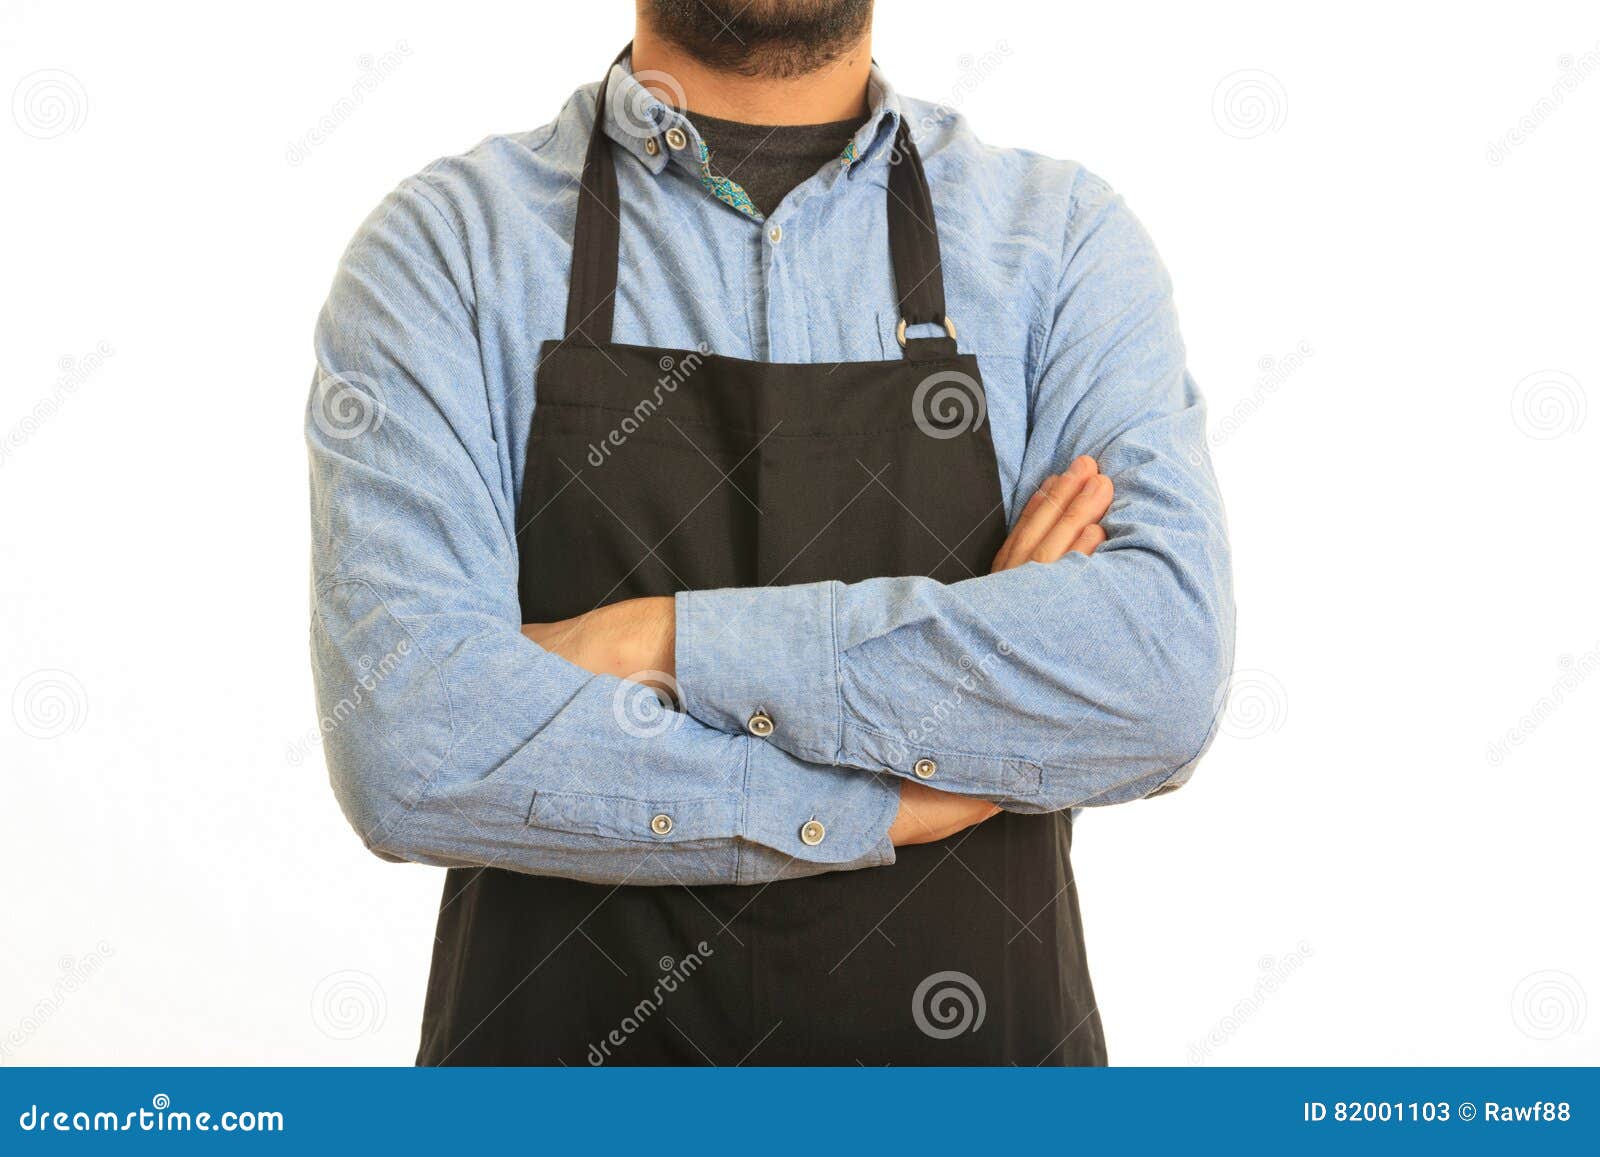 young man with black apron